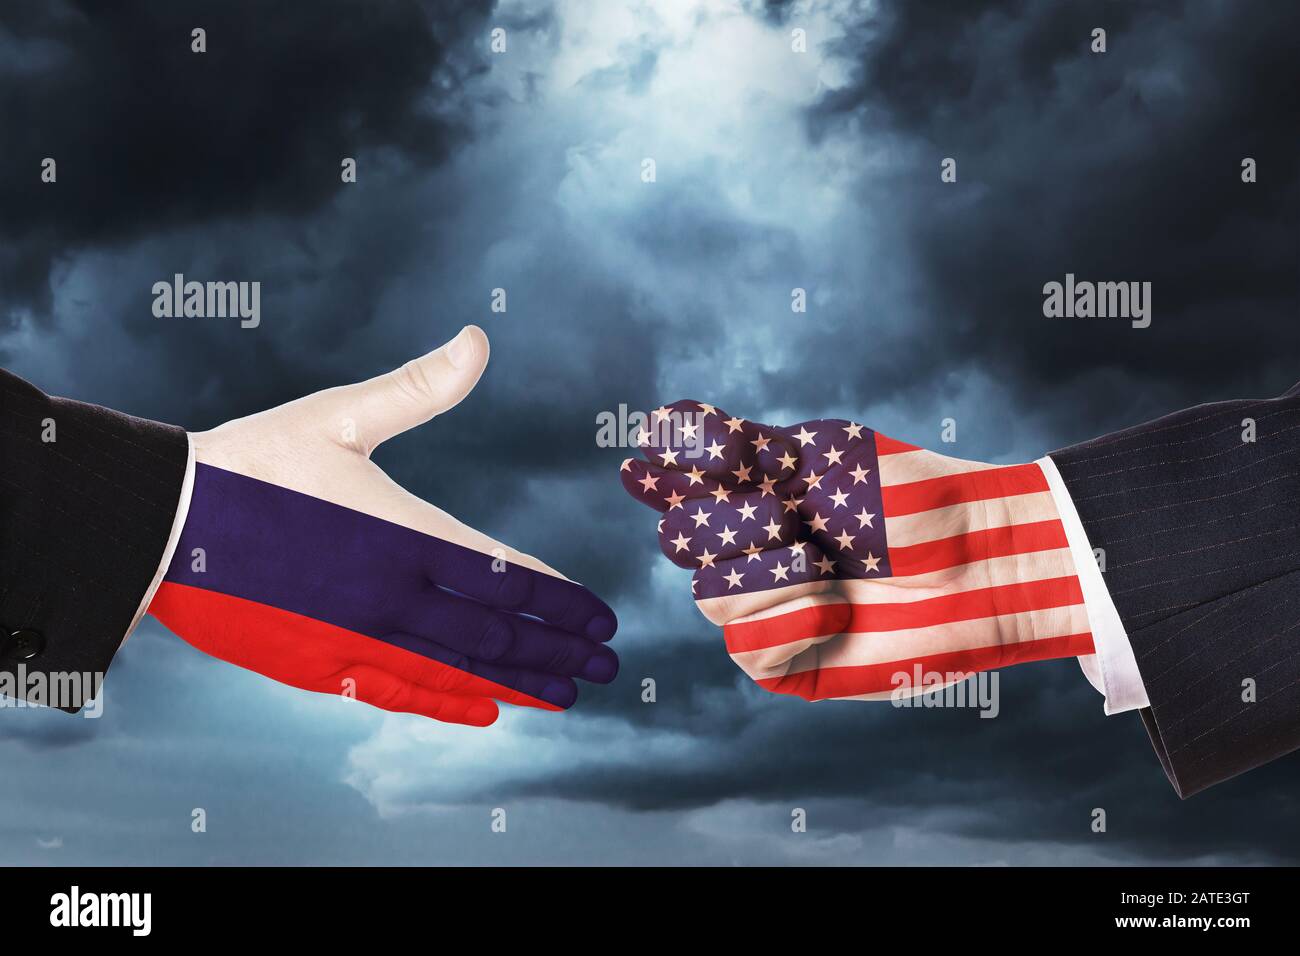 Hands on sky background. Concept on the topic of the proposal of friendship and relations between Russia and America Stock Photo